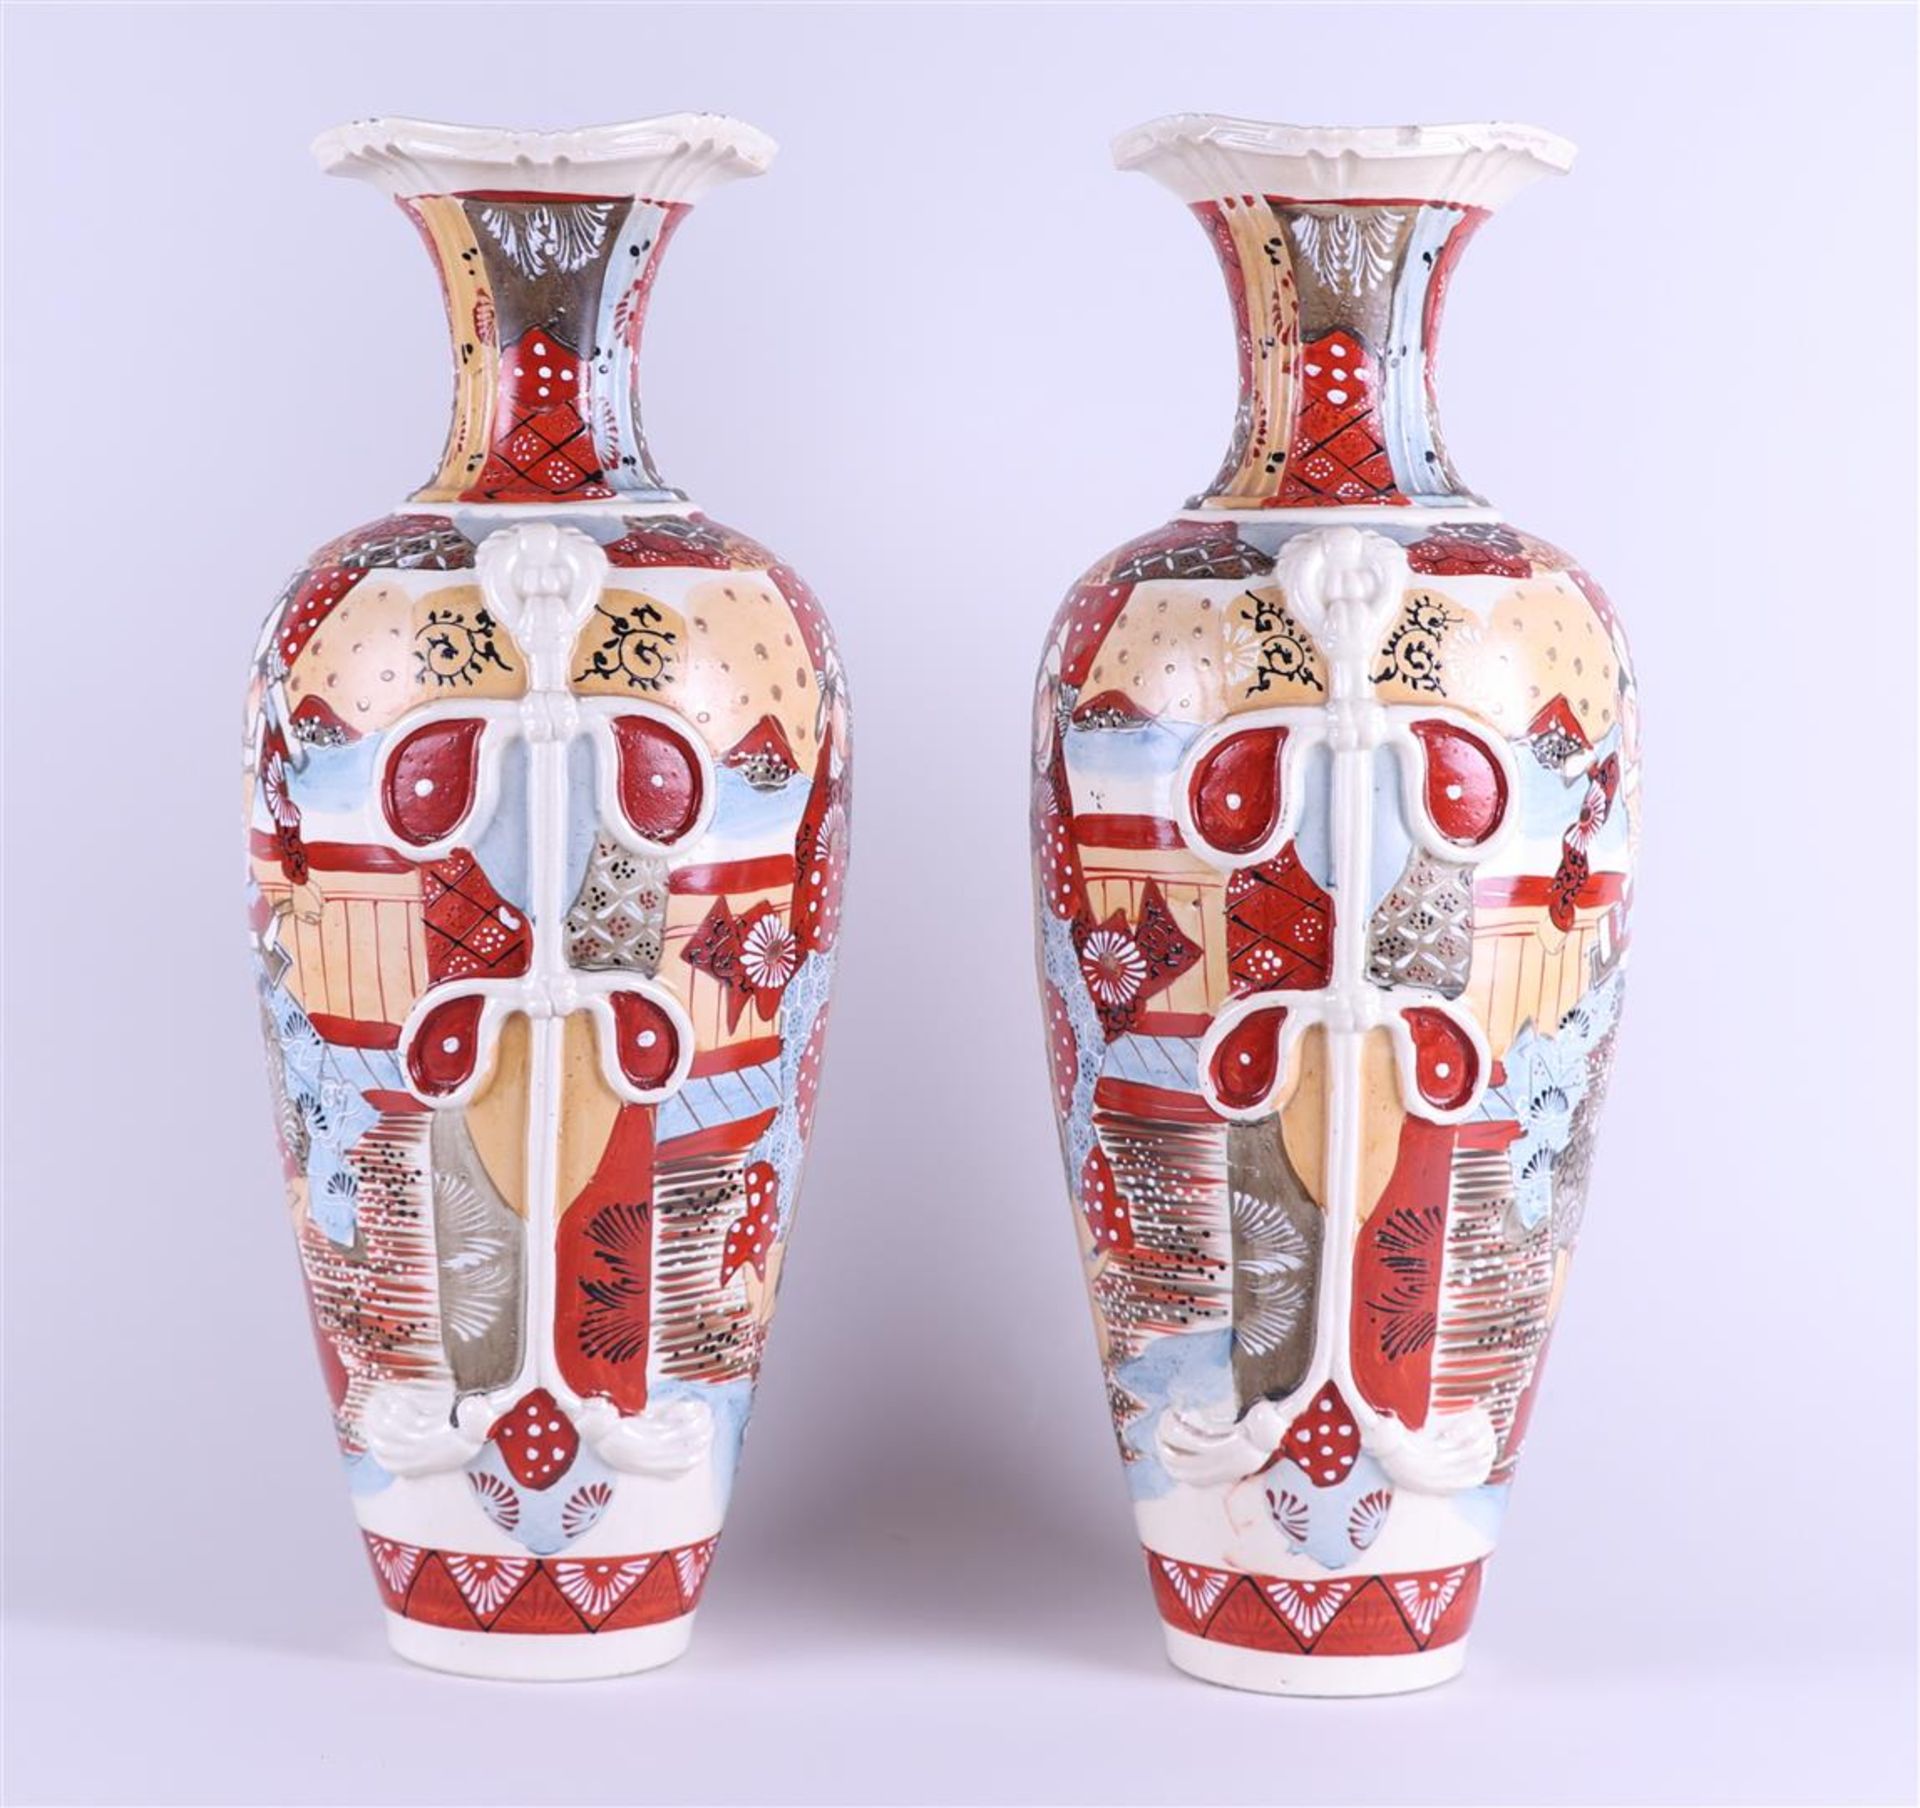 A set of two Satsuma earthenware vases decorated with various figures. Japan, circa 1900. - Image 2 of 4